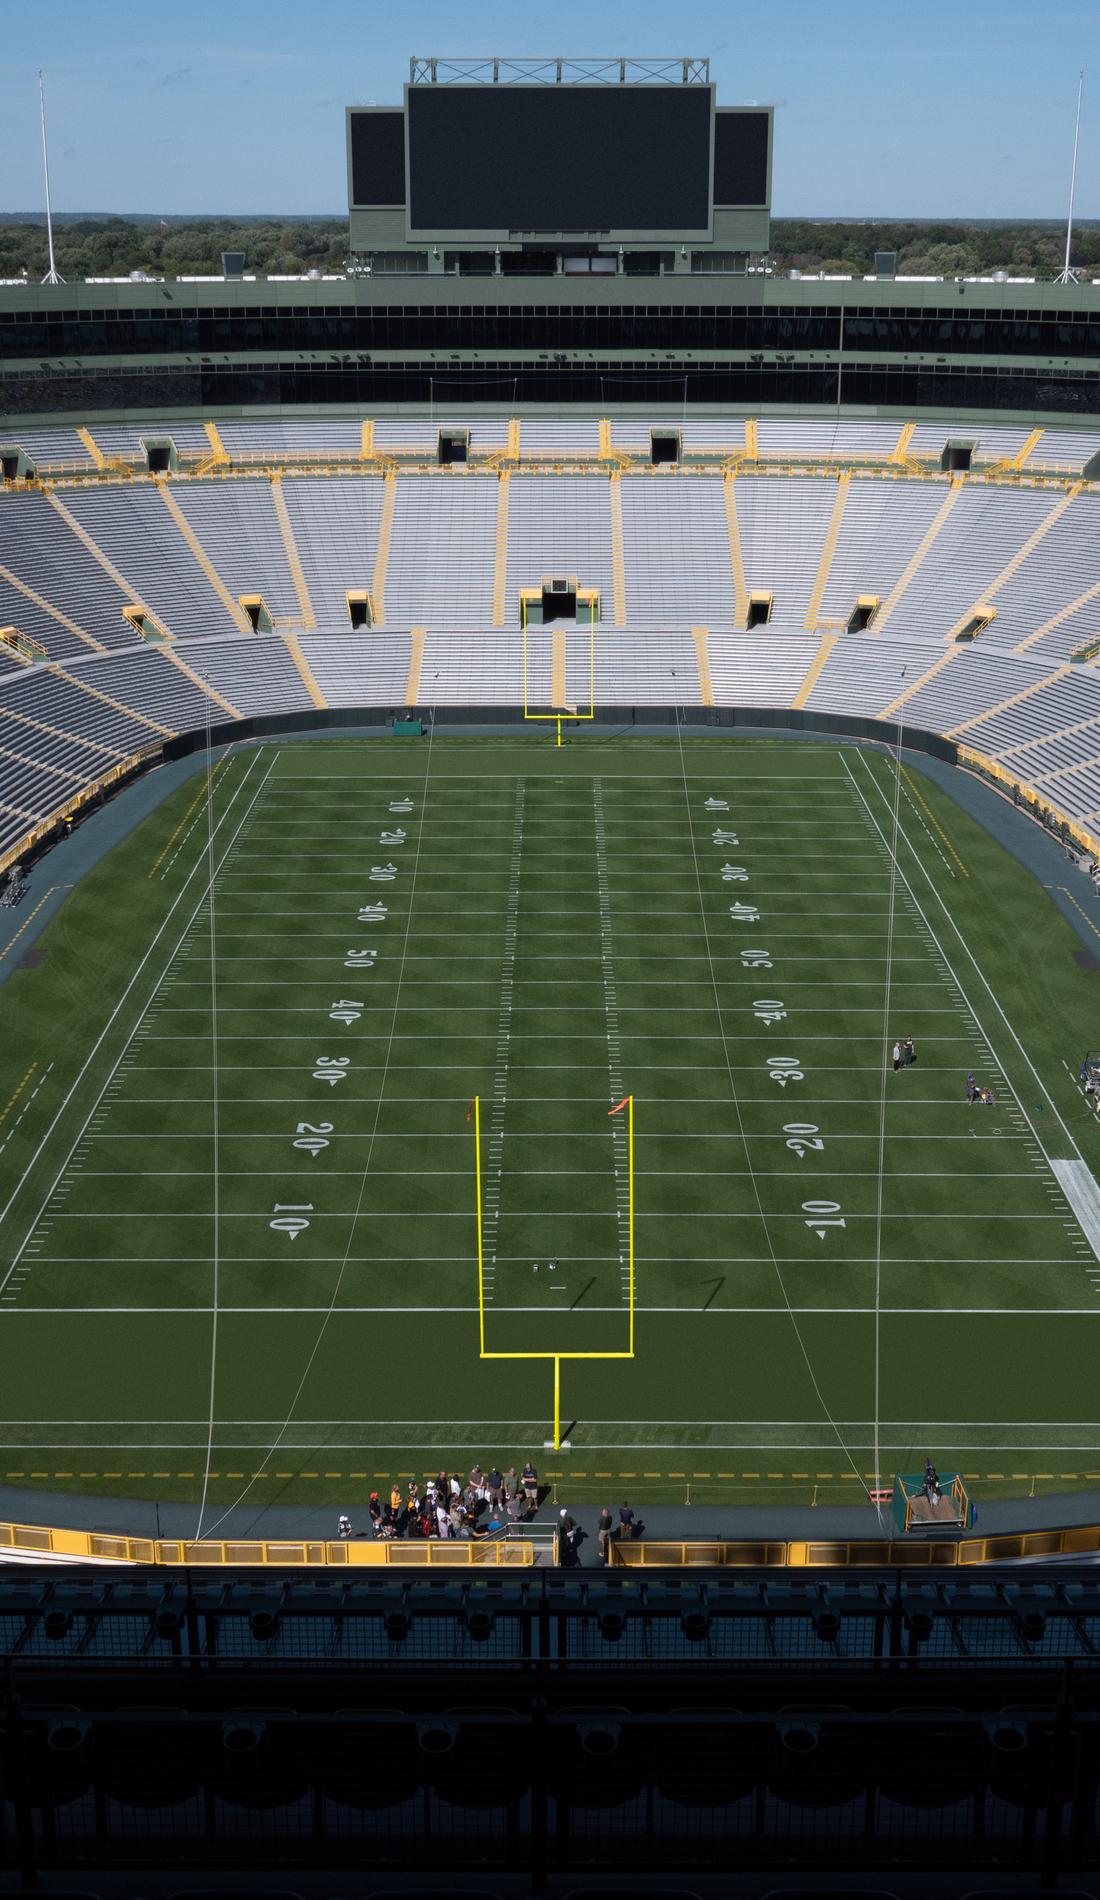 green bay packers away tickets